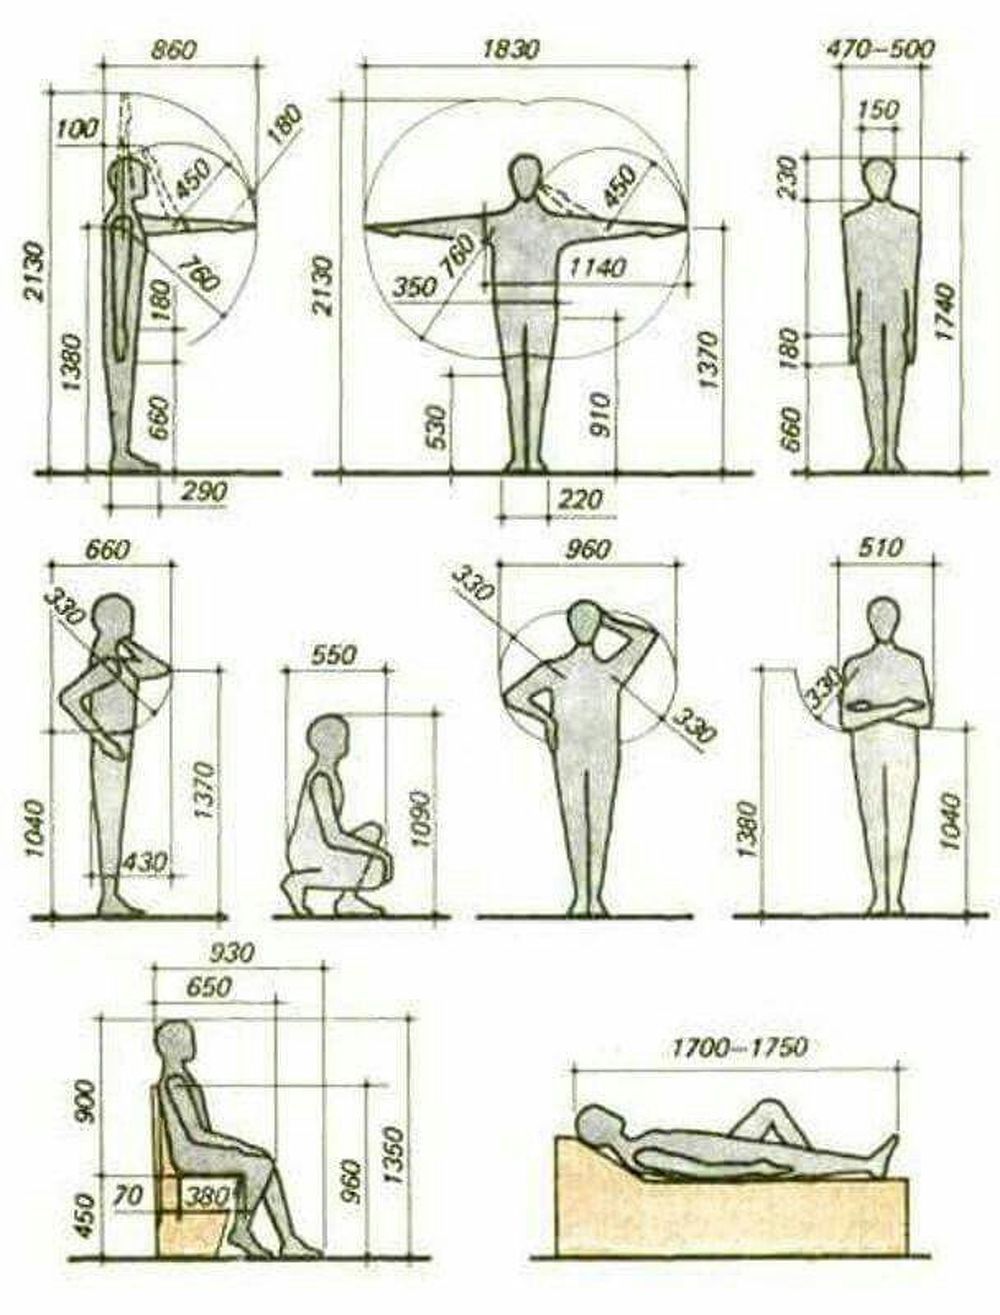 Applications of Anthropometry